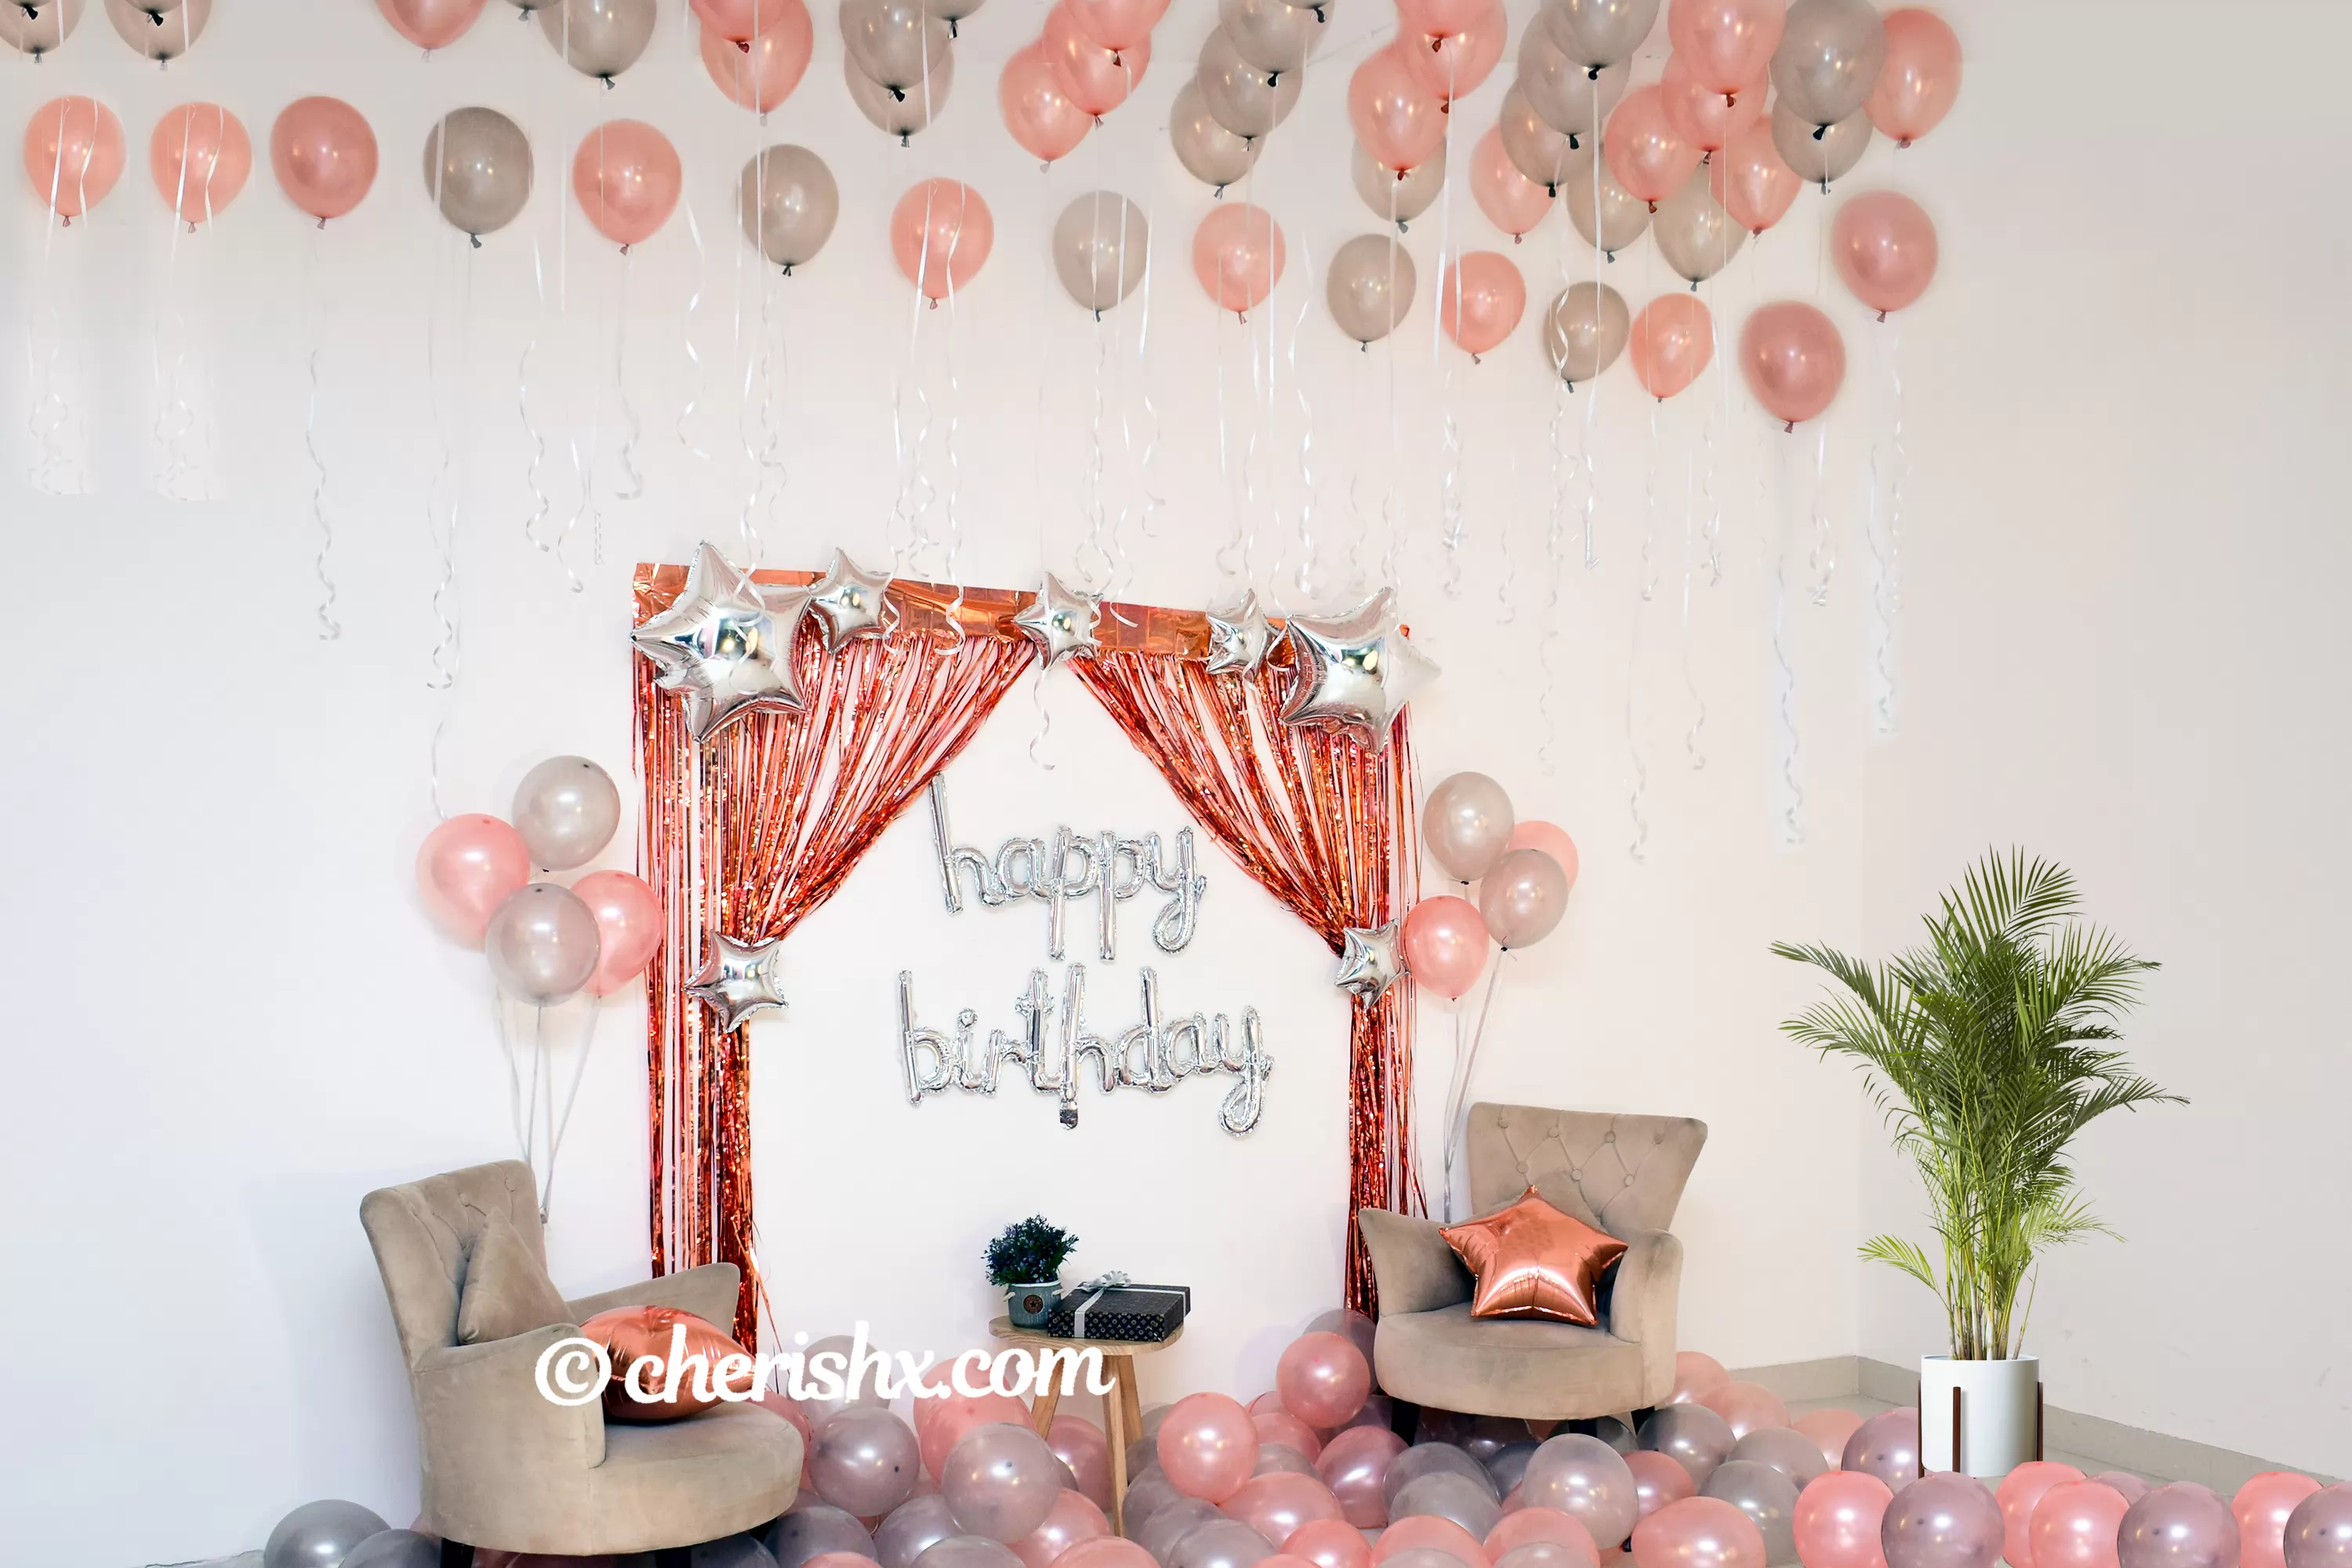 Adult Theme Birthday party Decoration For your friends, brother